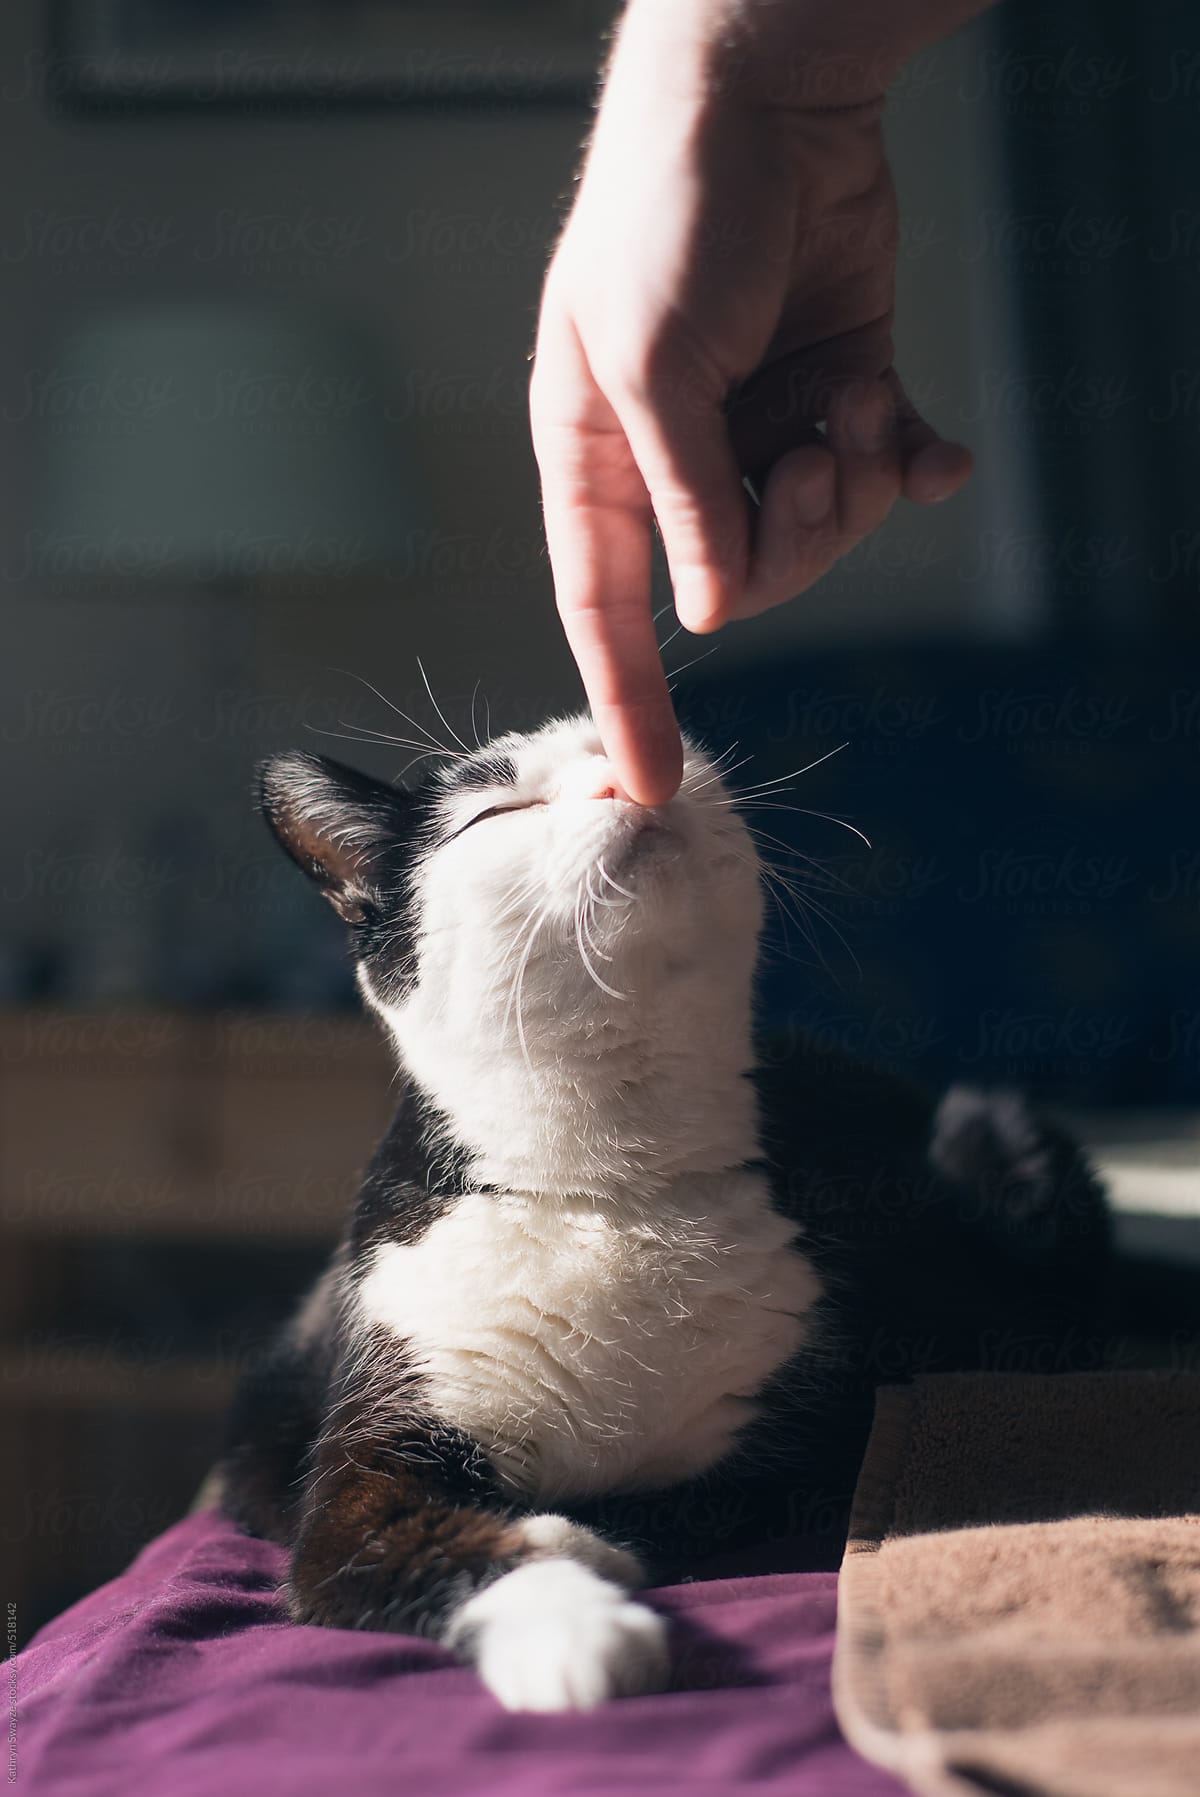 Man\'s hand teases black and white cat gently, while her head tilts up to sniff